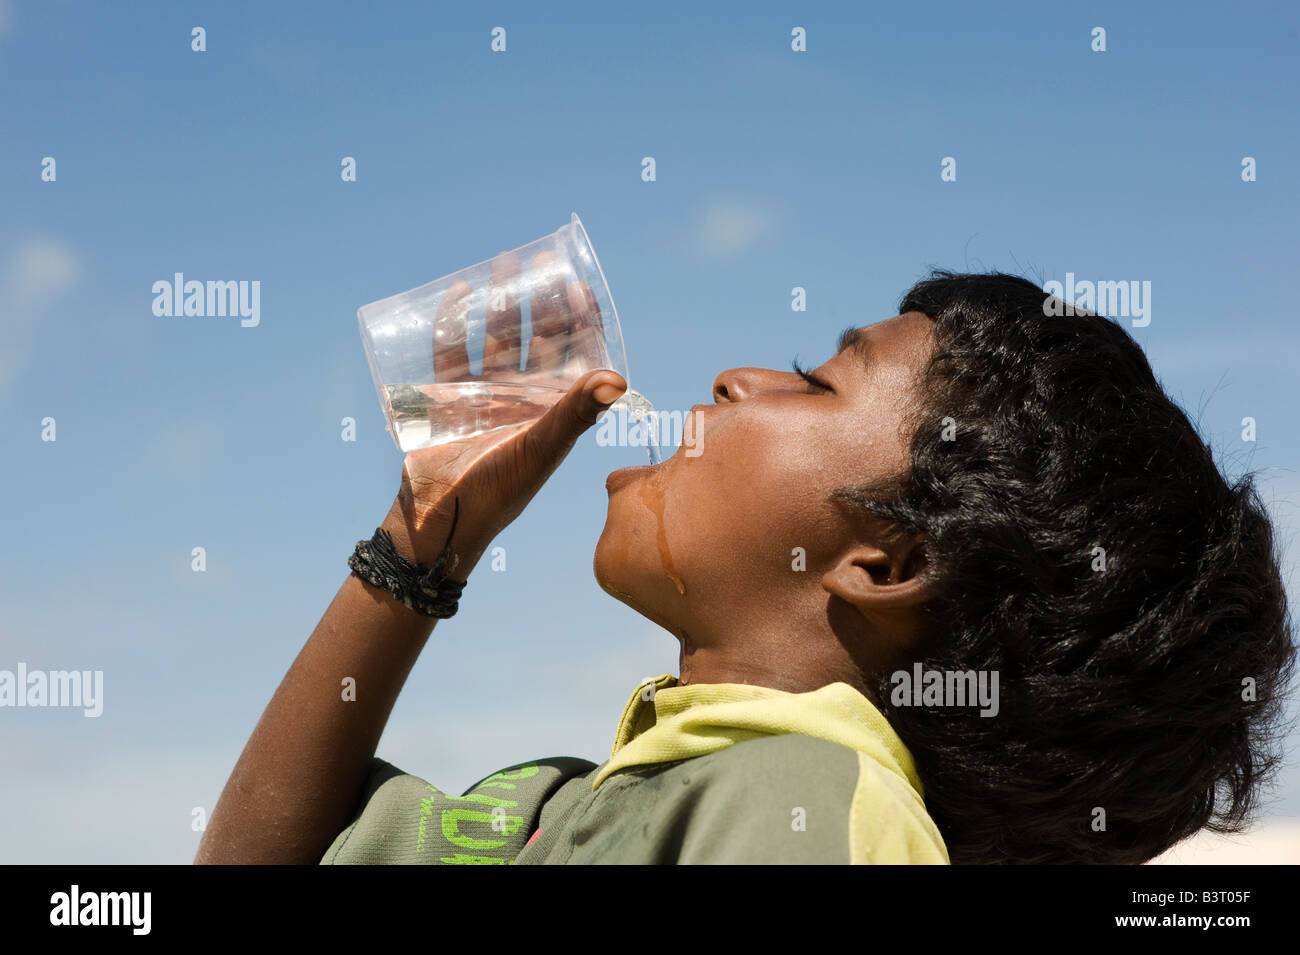 https://c8.alamy.com/comp/B3T05F/indian-boy-drinking-water-from-plastic-cup-india-B3T05F.jpg